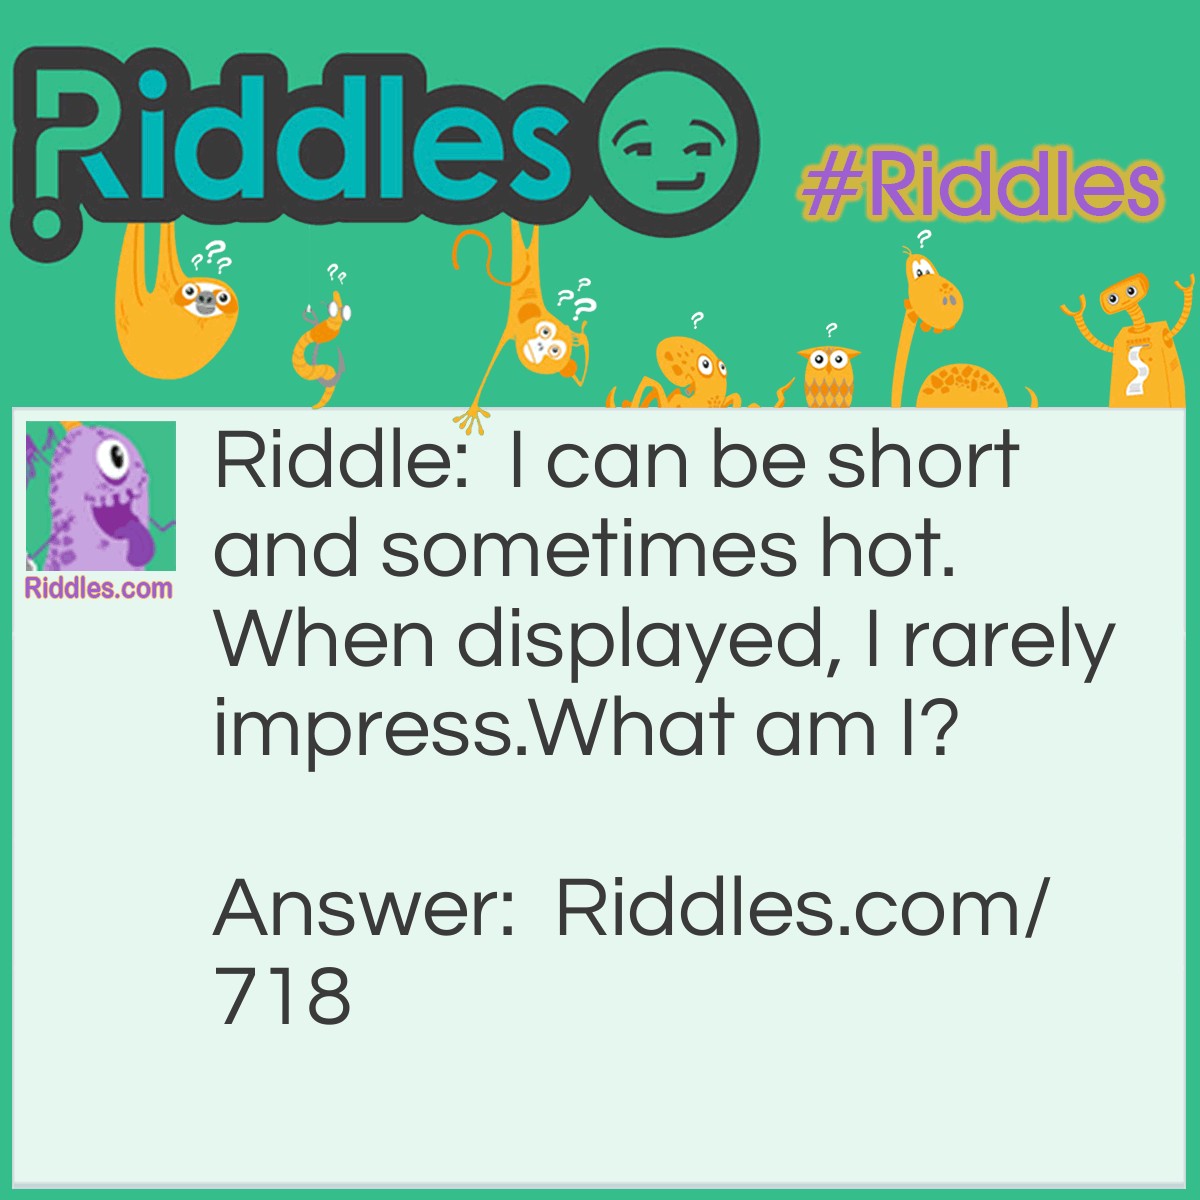 Riddle: I can be short and sometimes hot. When displayed, I rarely impress.
What am I? Answer: I am your temper.